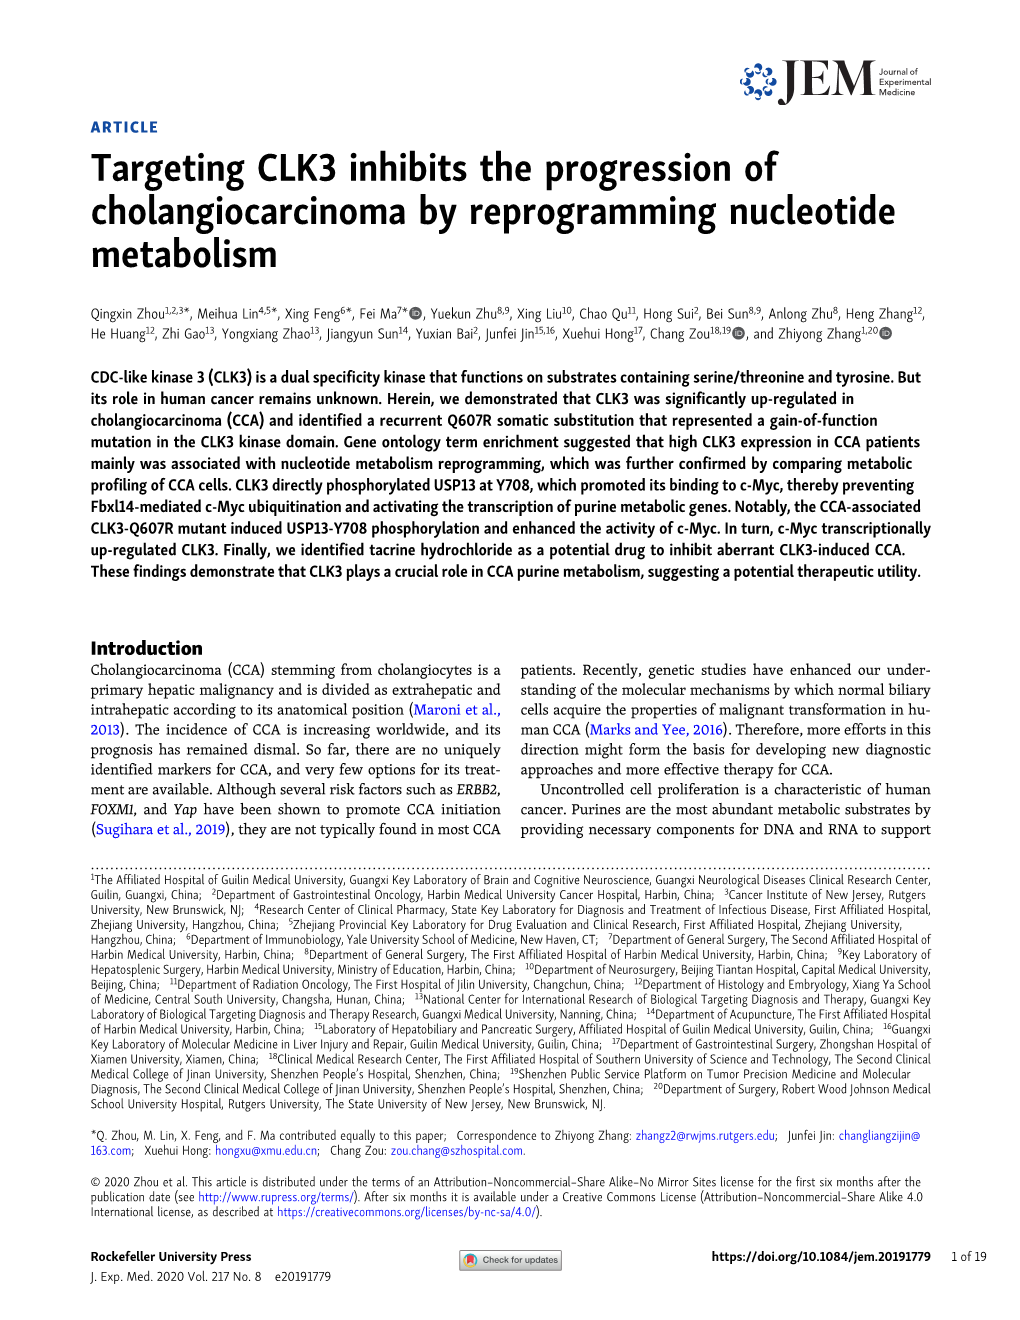 Targeting CLK3 Inhibits the Progression of Cholangiocarcinoma by Reprogramming Nucleotide Metabolism